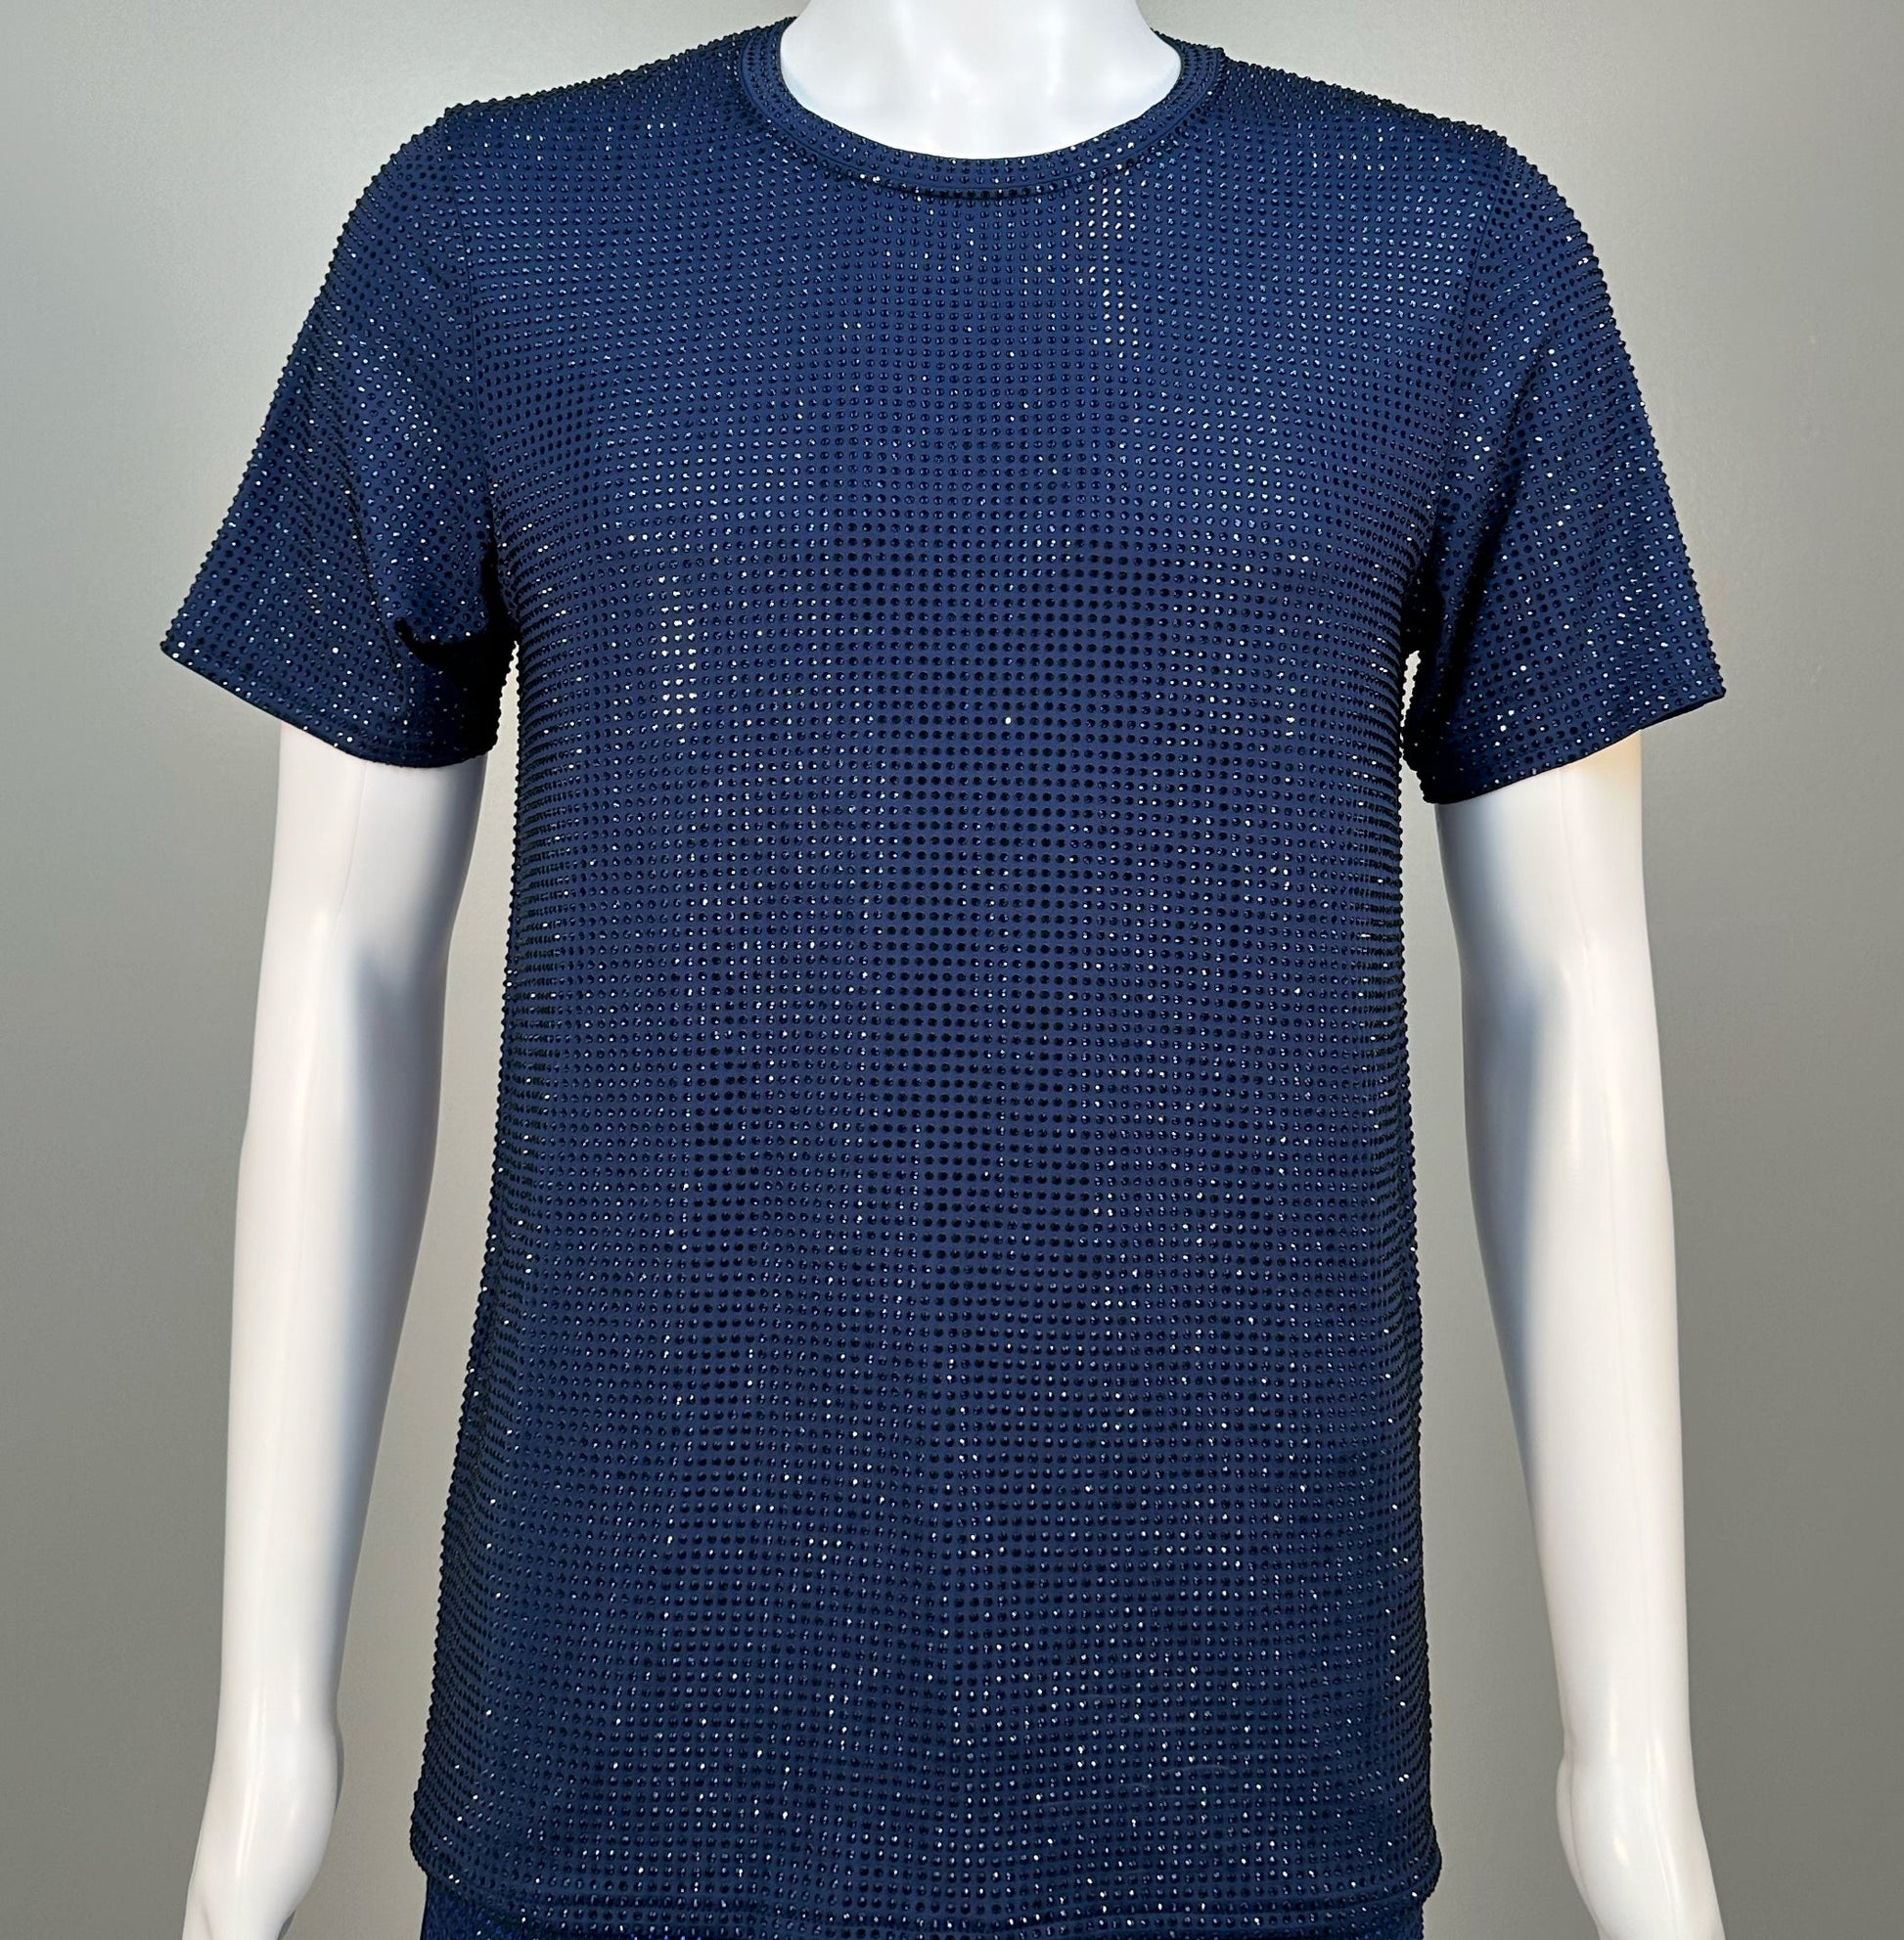 Photo of a sparkling Navy Crystals on Navy Fabric T-shirt featuring thousands of crystal rhinestones.